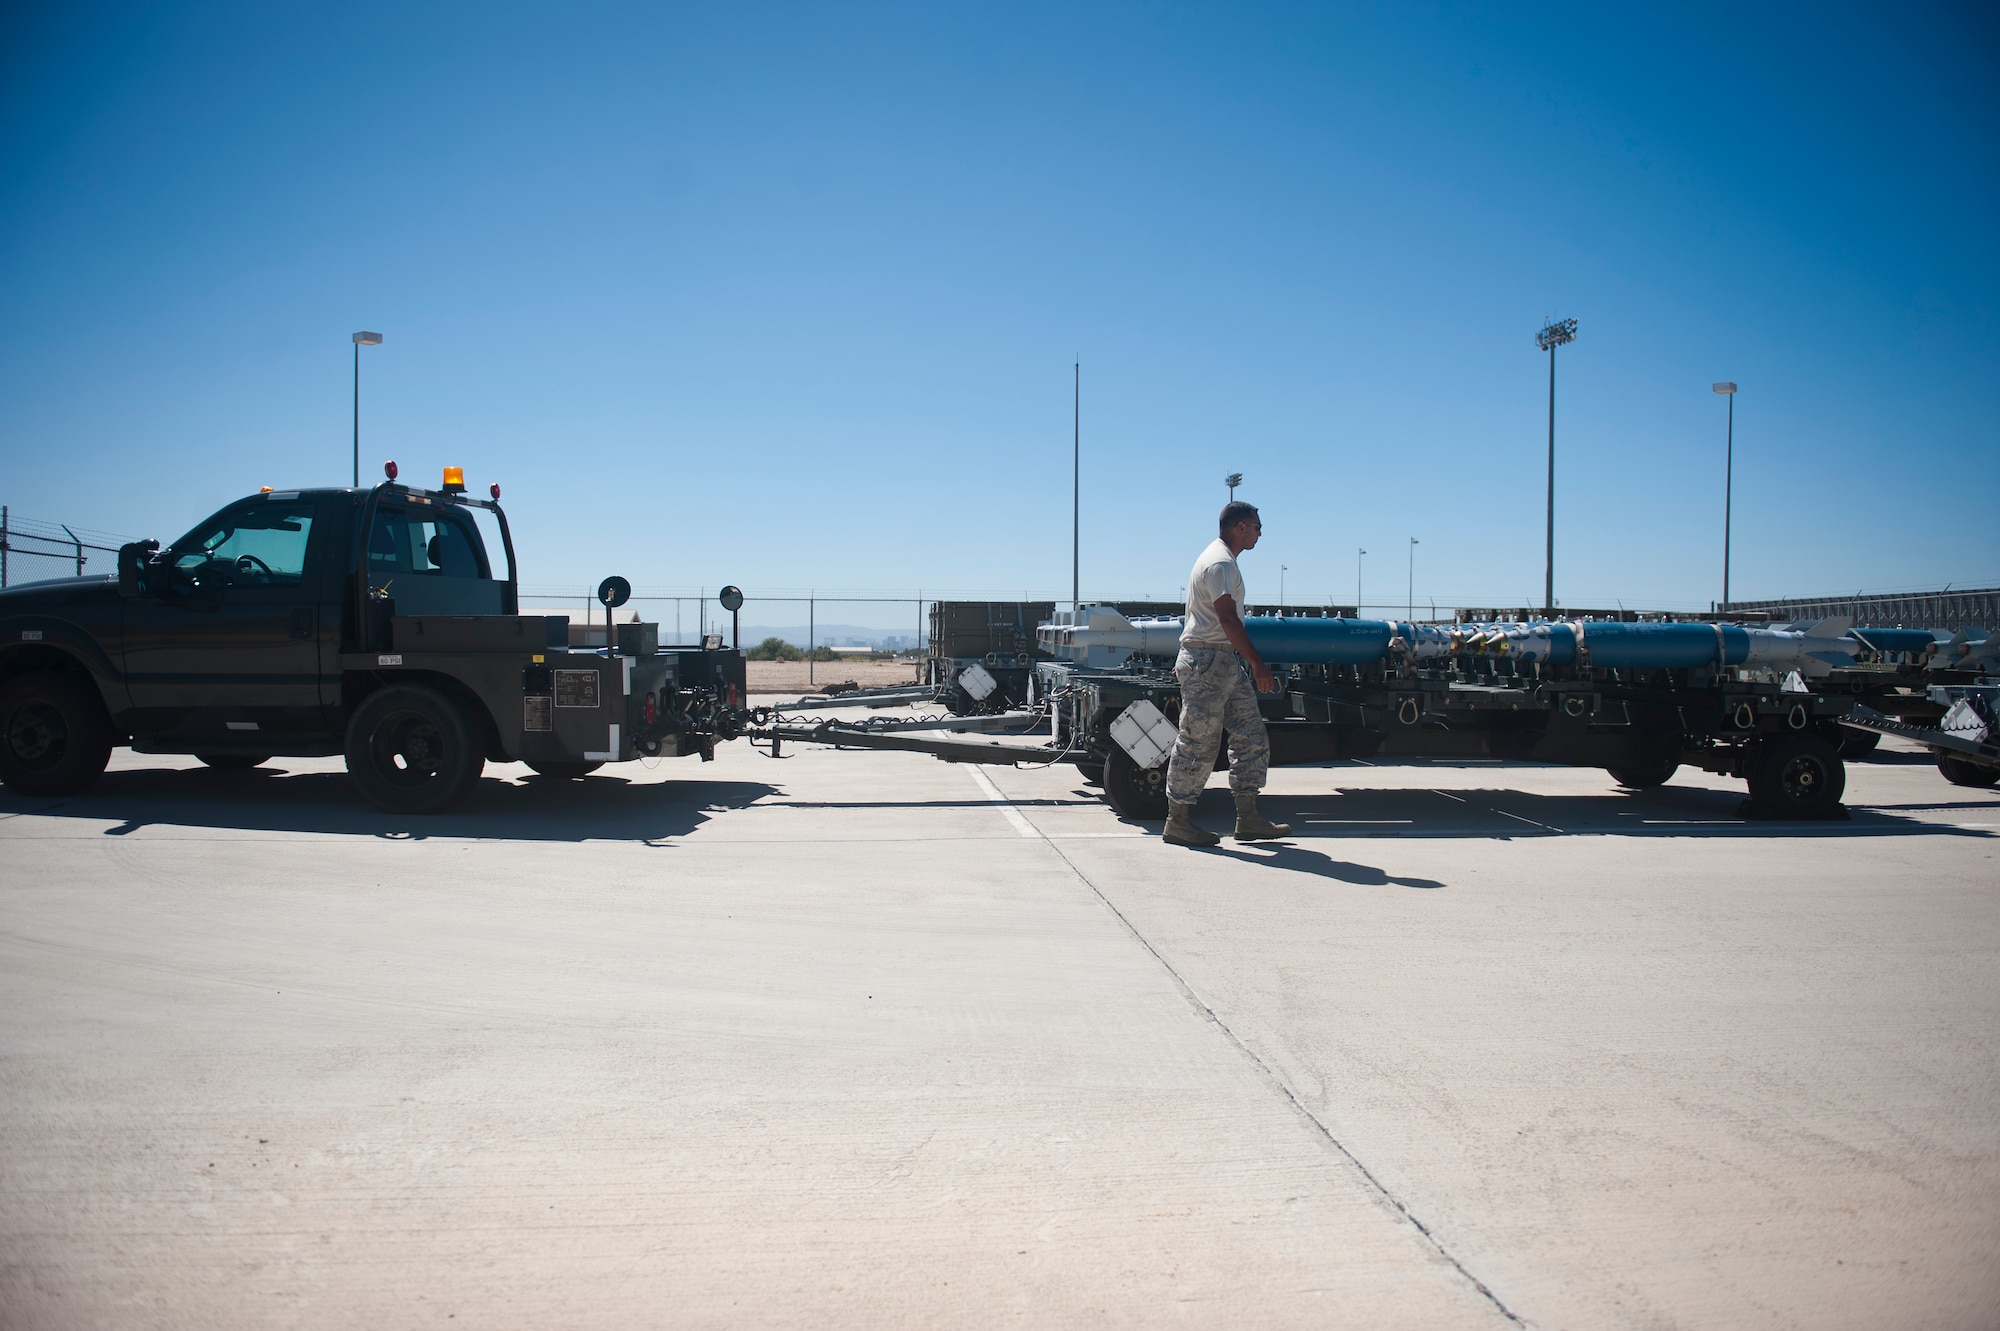 Senior Airman Miguel Vega, 57th Maintenance Squadron munitions line delivery crew chief, inspects munitions on his trailer before heading out to the flight line at Nellis Air Force Base, Nev., Sept. 19, 2014. Line delivery, or ‘Line-D,’ Airmen deliver all of the munitions assets from the munitions storage area to aircraft on the flight line. (U.S. Air Force photo by Staff Sgt. Siuta B. Ika)